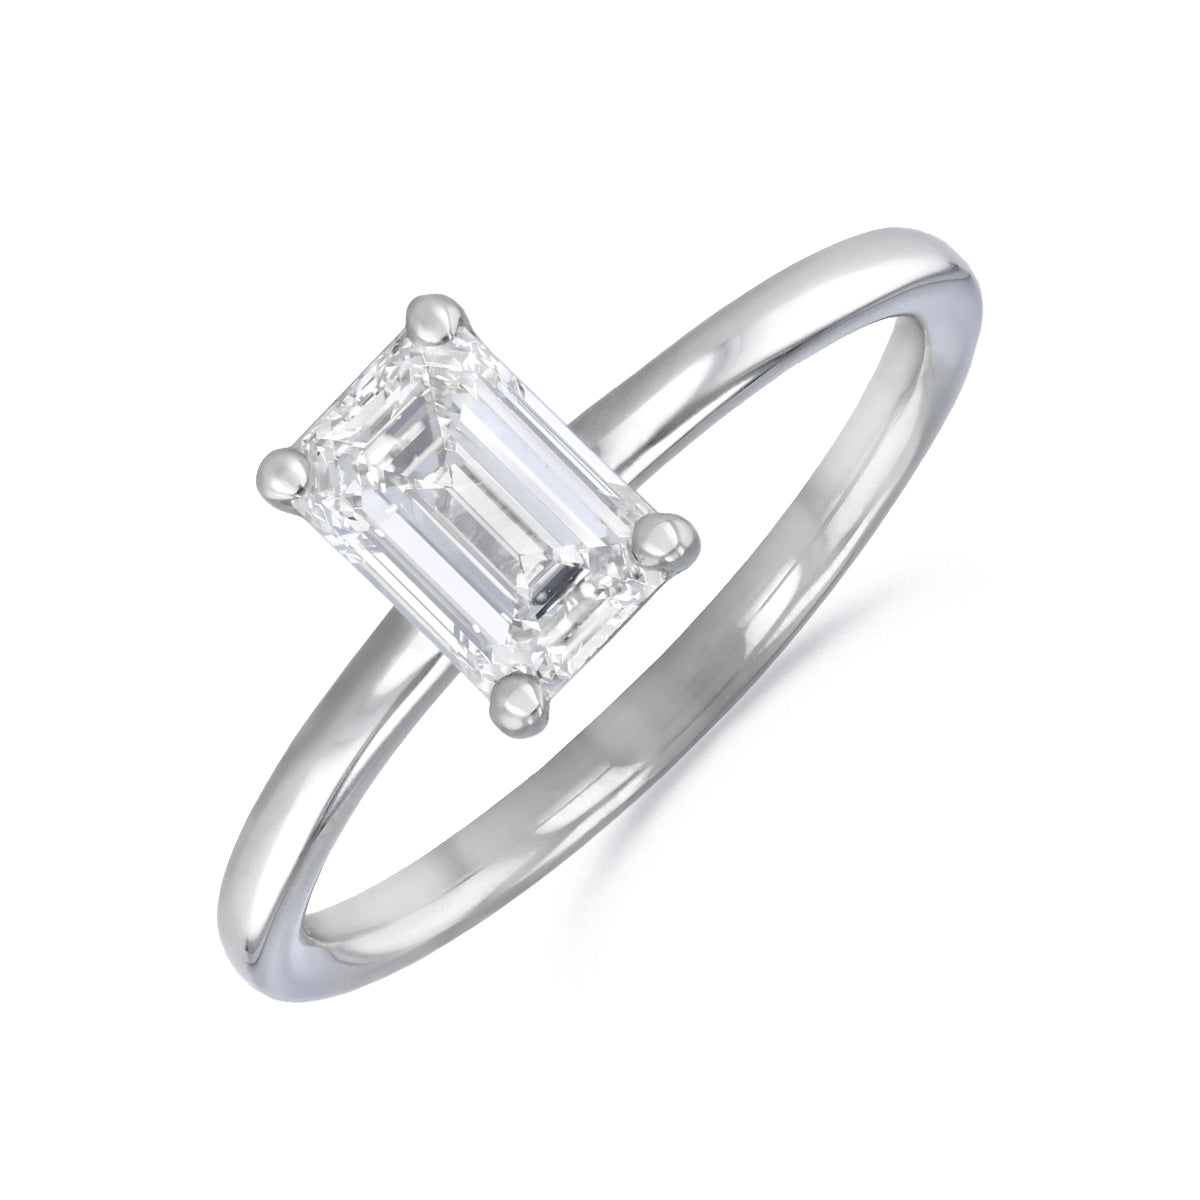 0-25ct-sofia-emerald-cut-solitaire-diamond-engagement-ring-18ct-white-gold